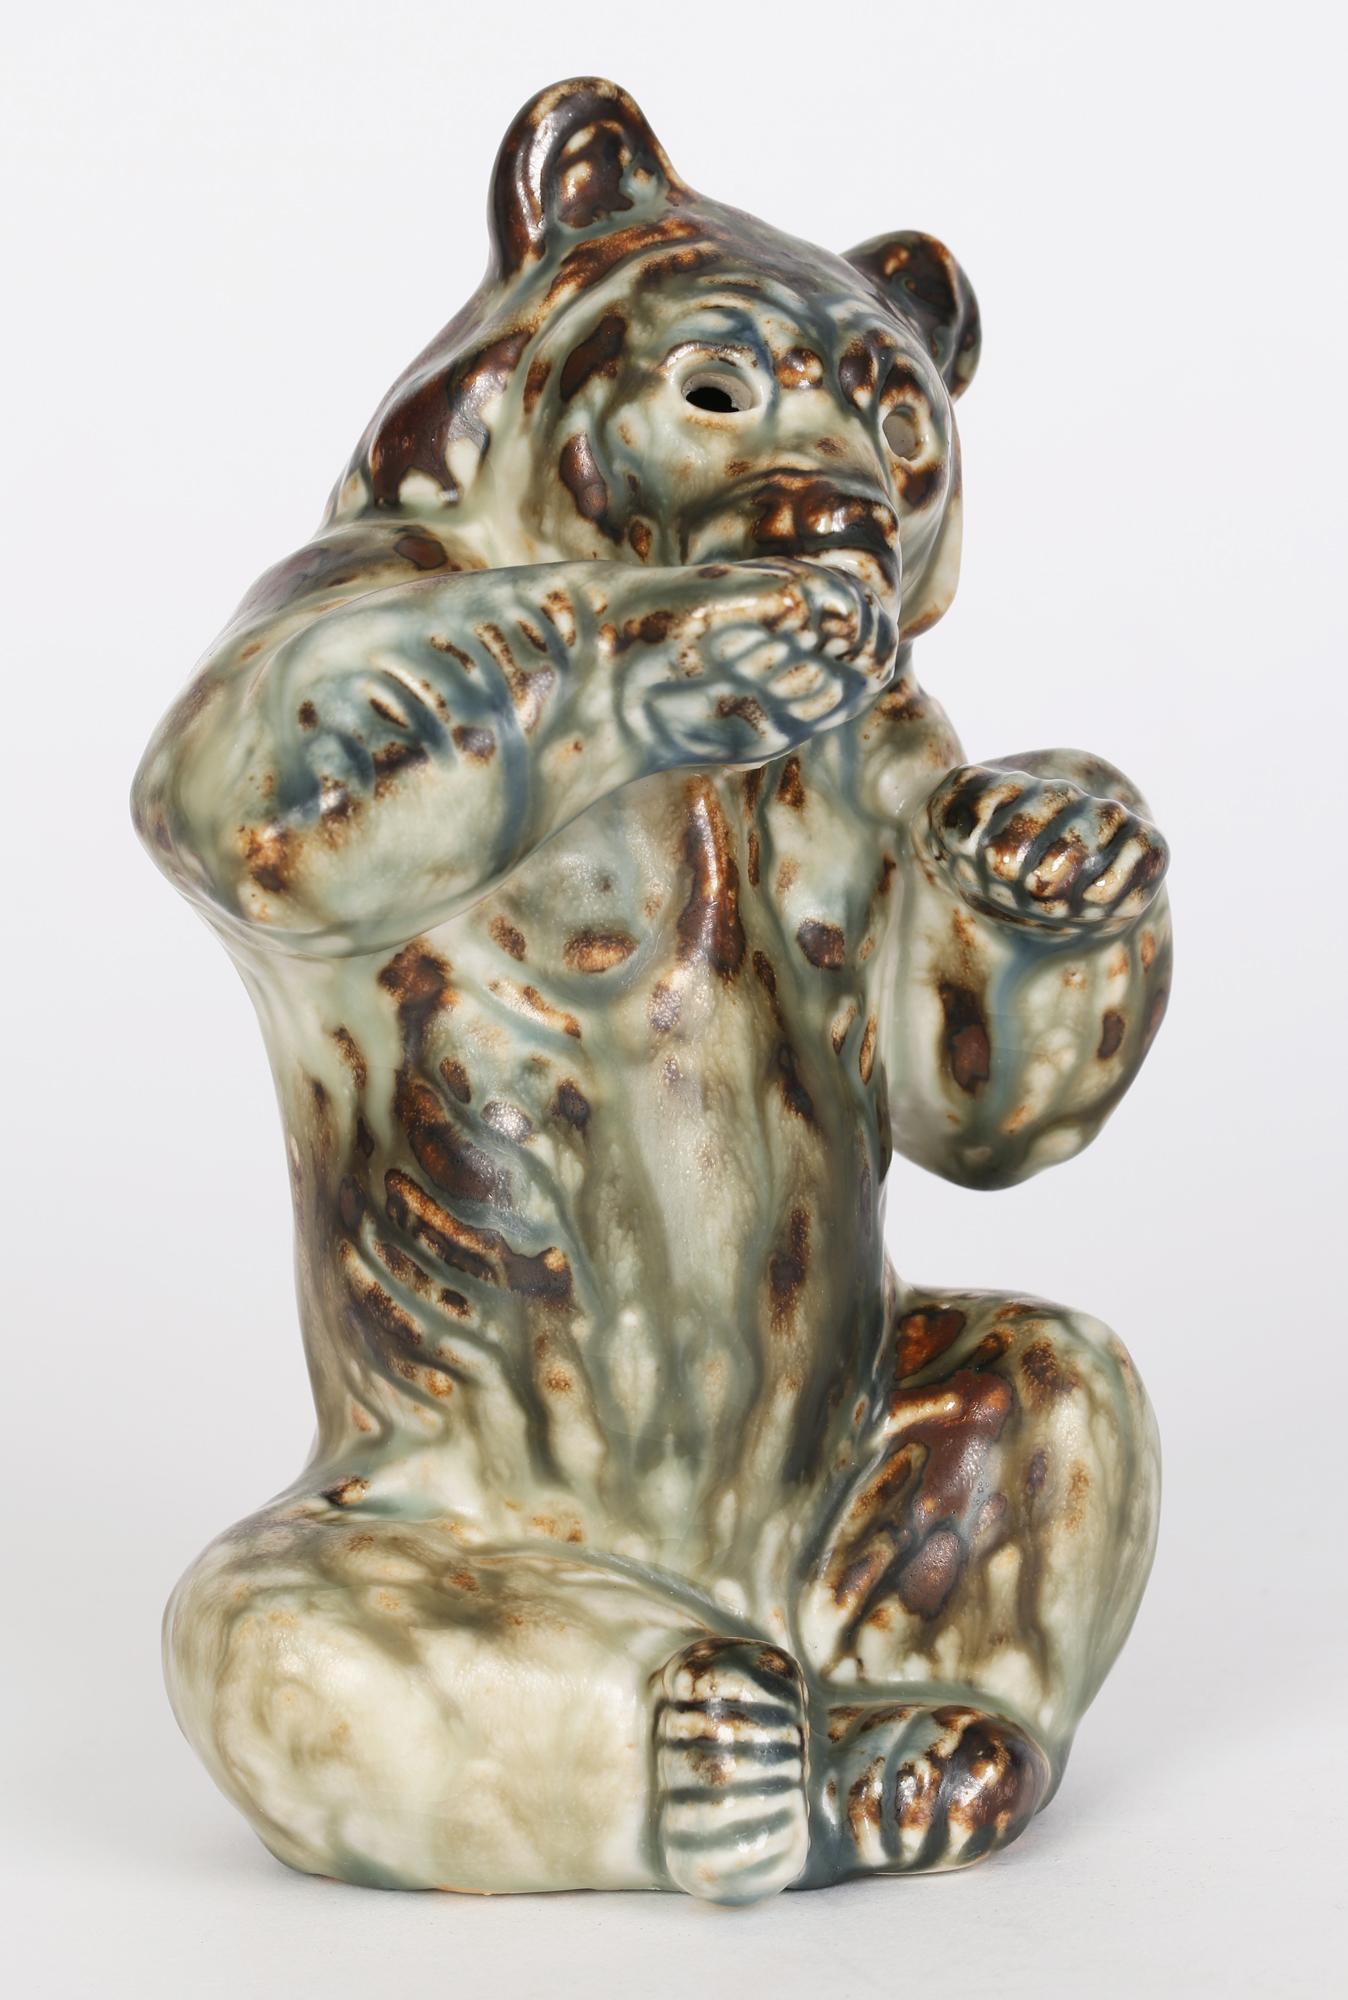 A stunning Danish Royal Copenhagen porcelain sculptural figure of a seated Bear by renowned animal artist Khud Kyhn (Danish, 1880-1969) conceived around 1935. The hollow made sculpture sits on flat unglazed foot with a slightly recessed base, The